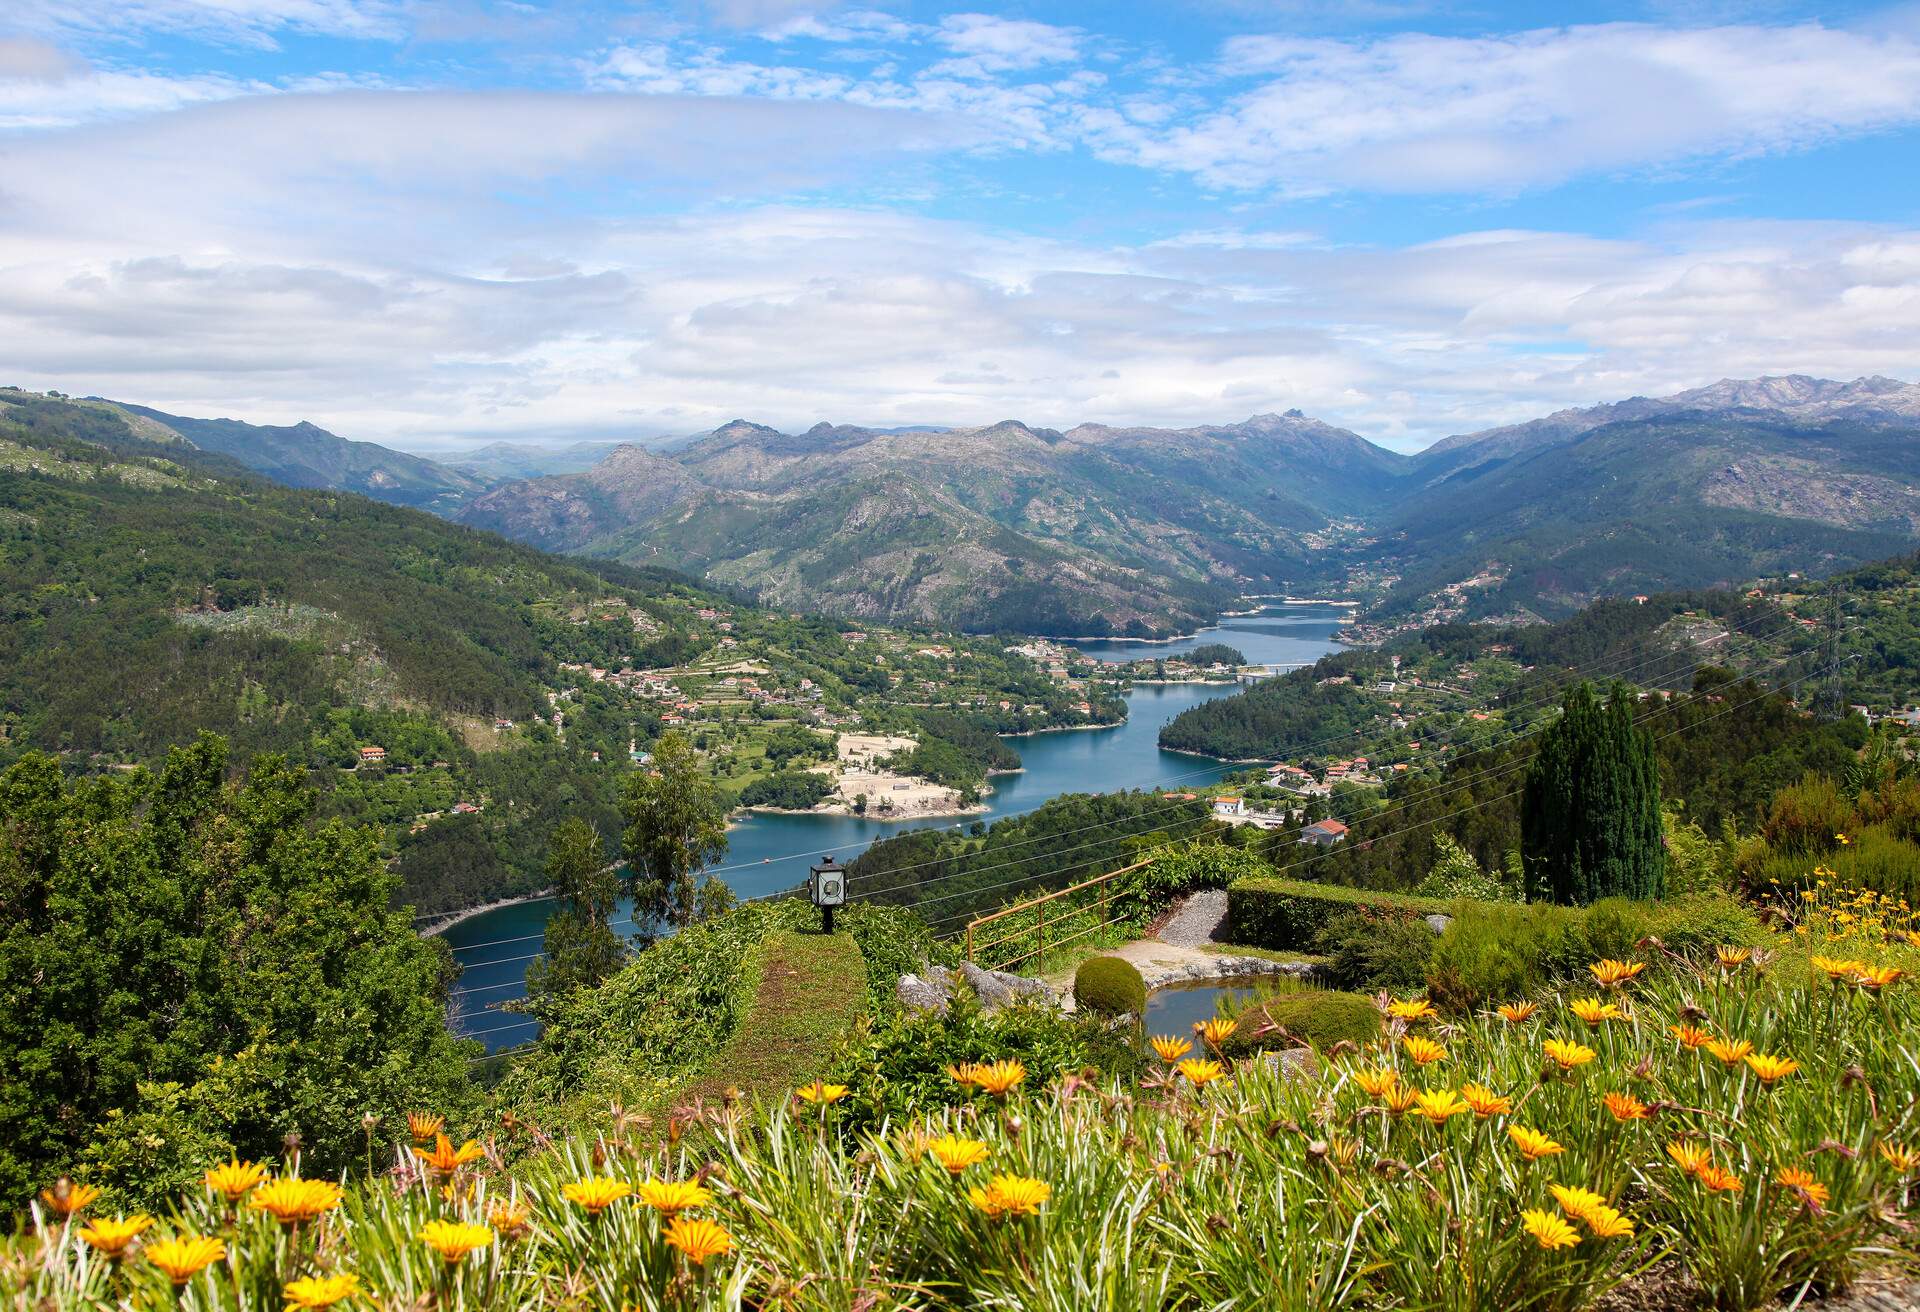 View on the Lima river meandering through Peneda Geres, the only national park in Portugal, located in the Norte region.; Shutterstock ID 241295794